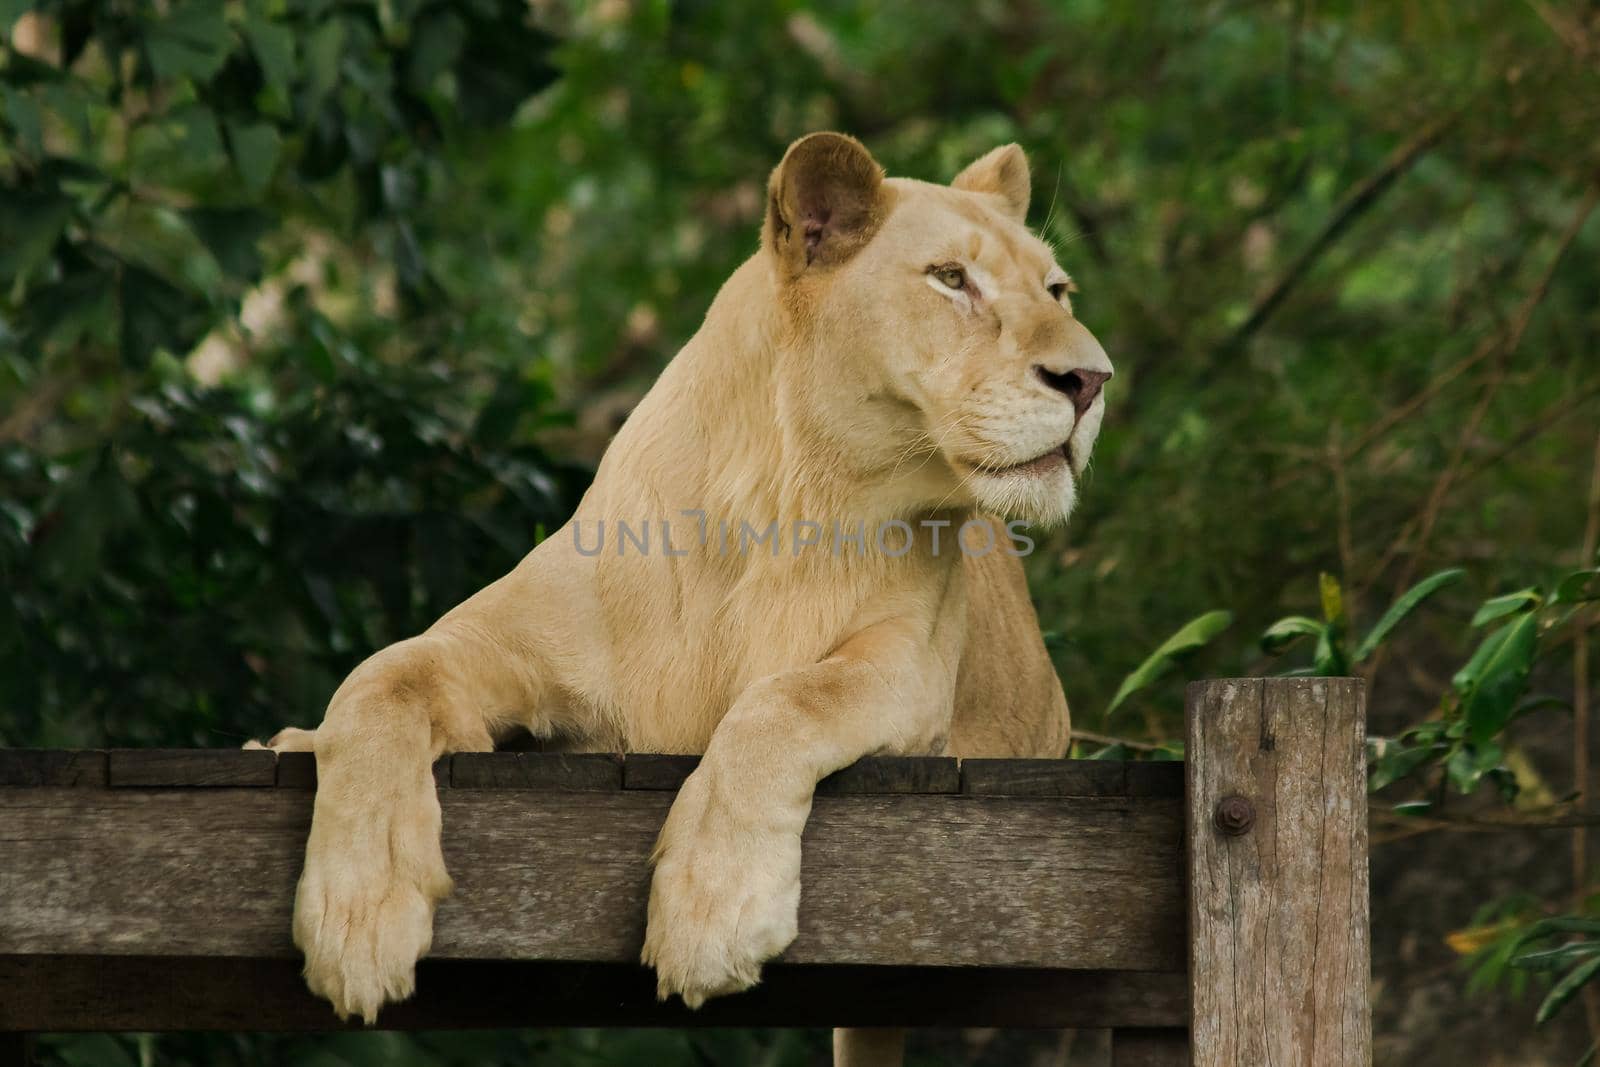 Female African Lion is sleeping looking at something.
The African Lion is found in Africa. In Asia, it can still be found, for example, in western India.